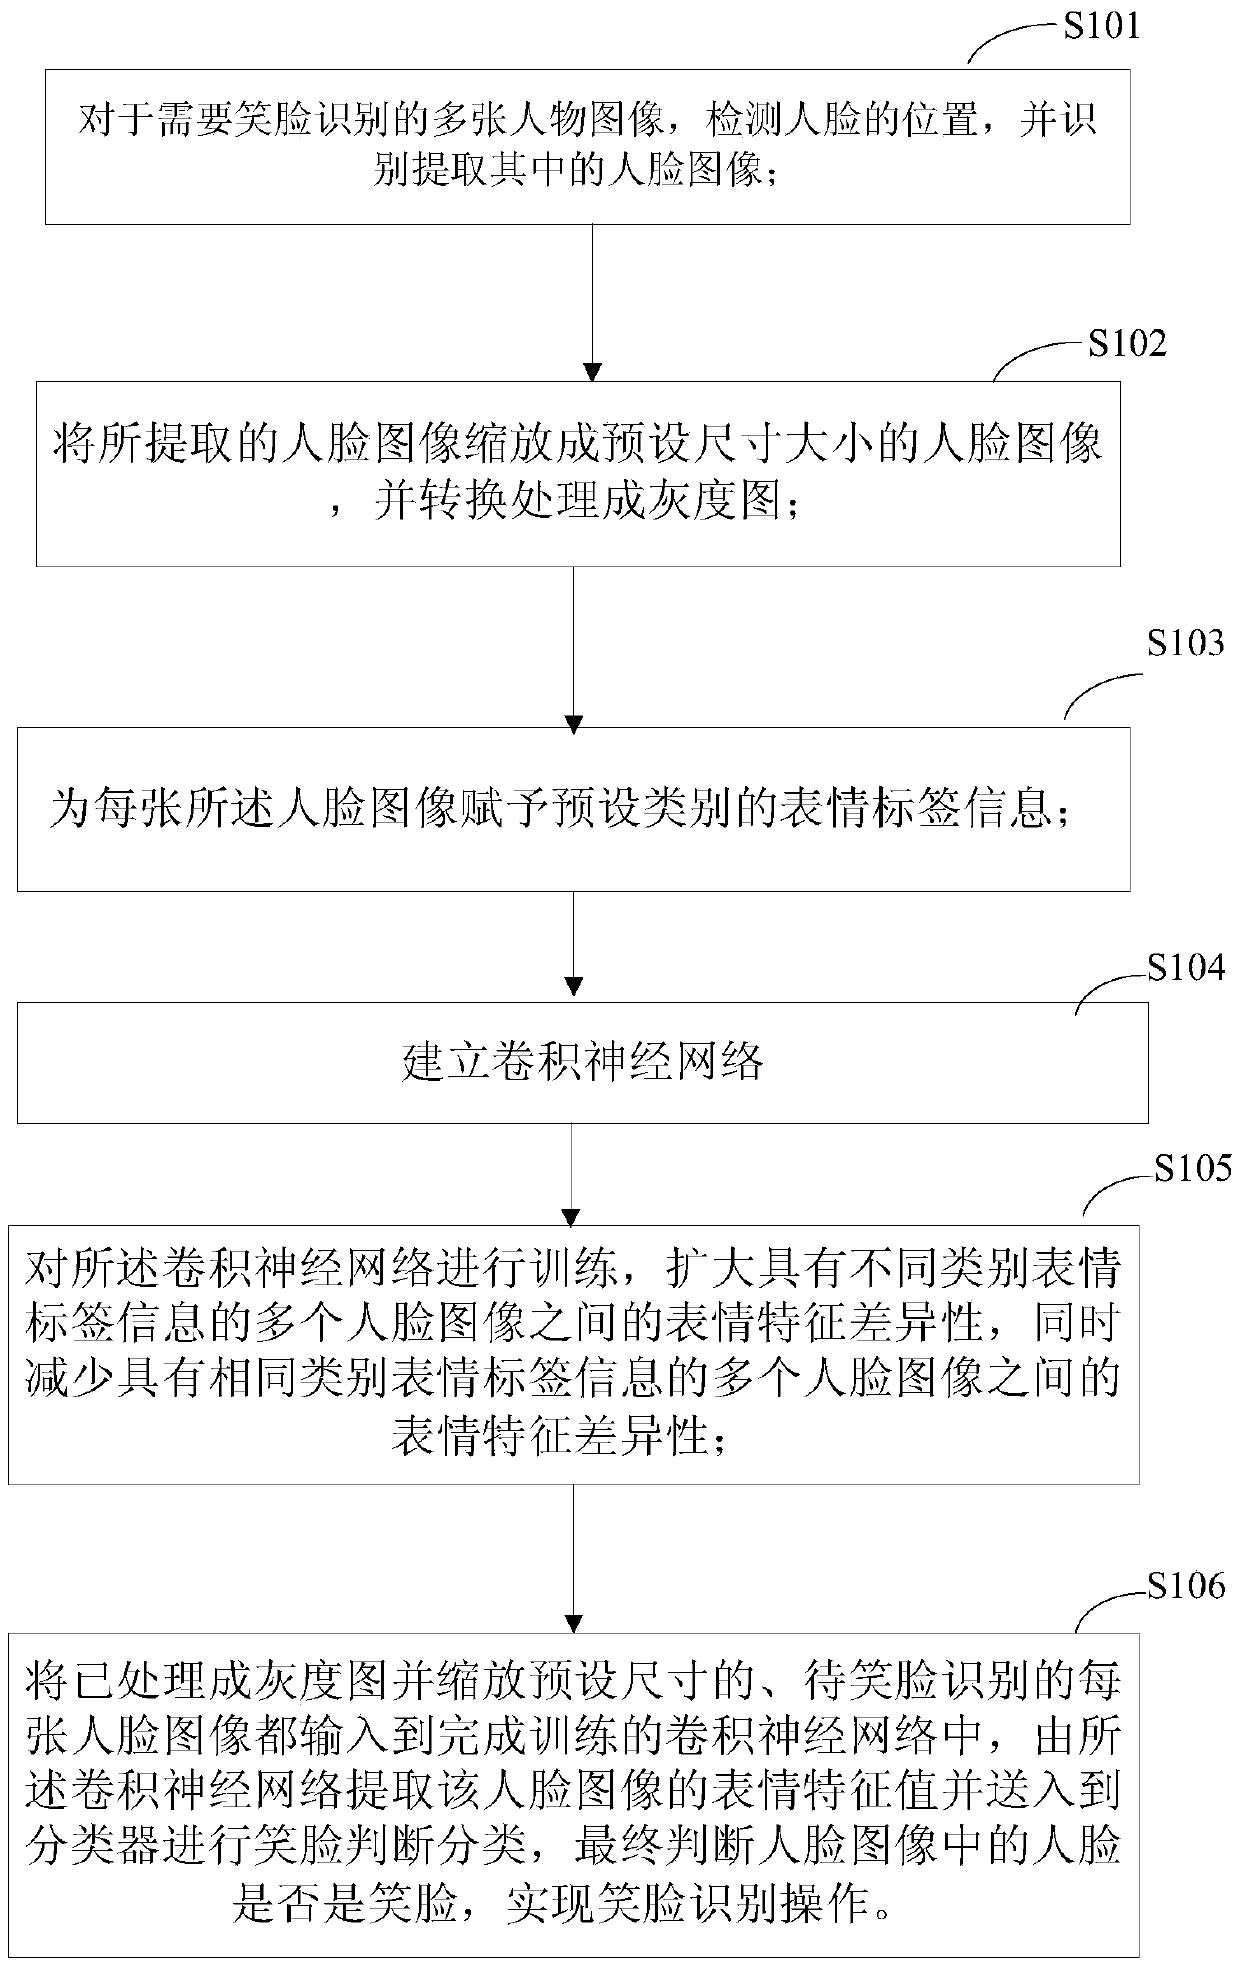 Smile face recognition method and device for human face image